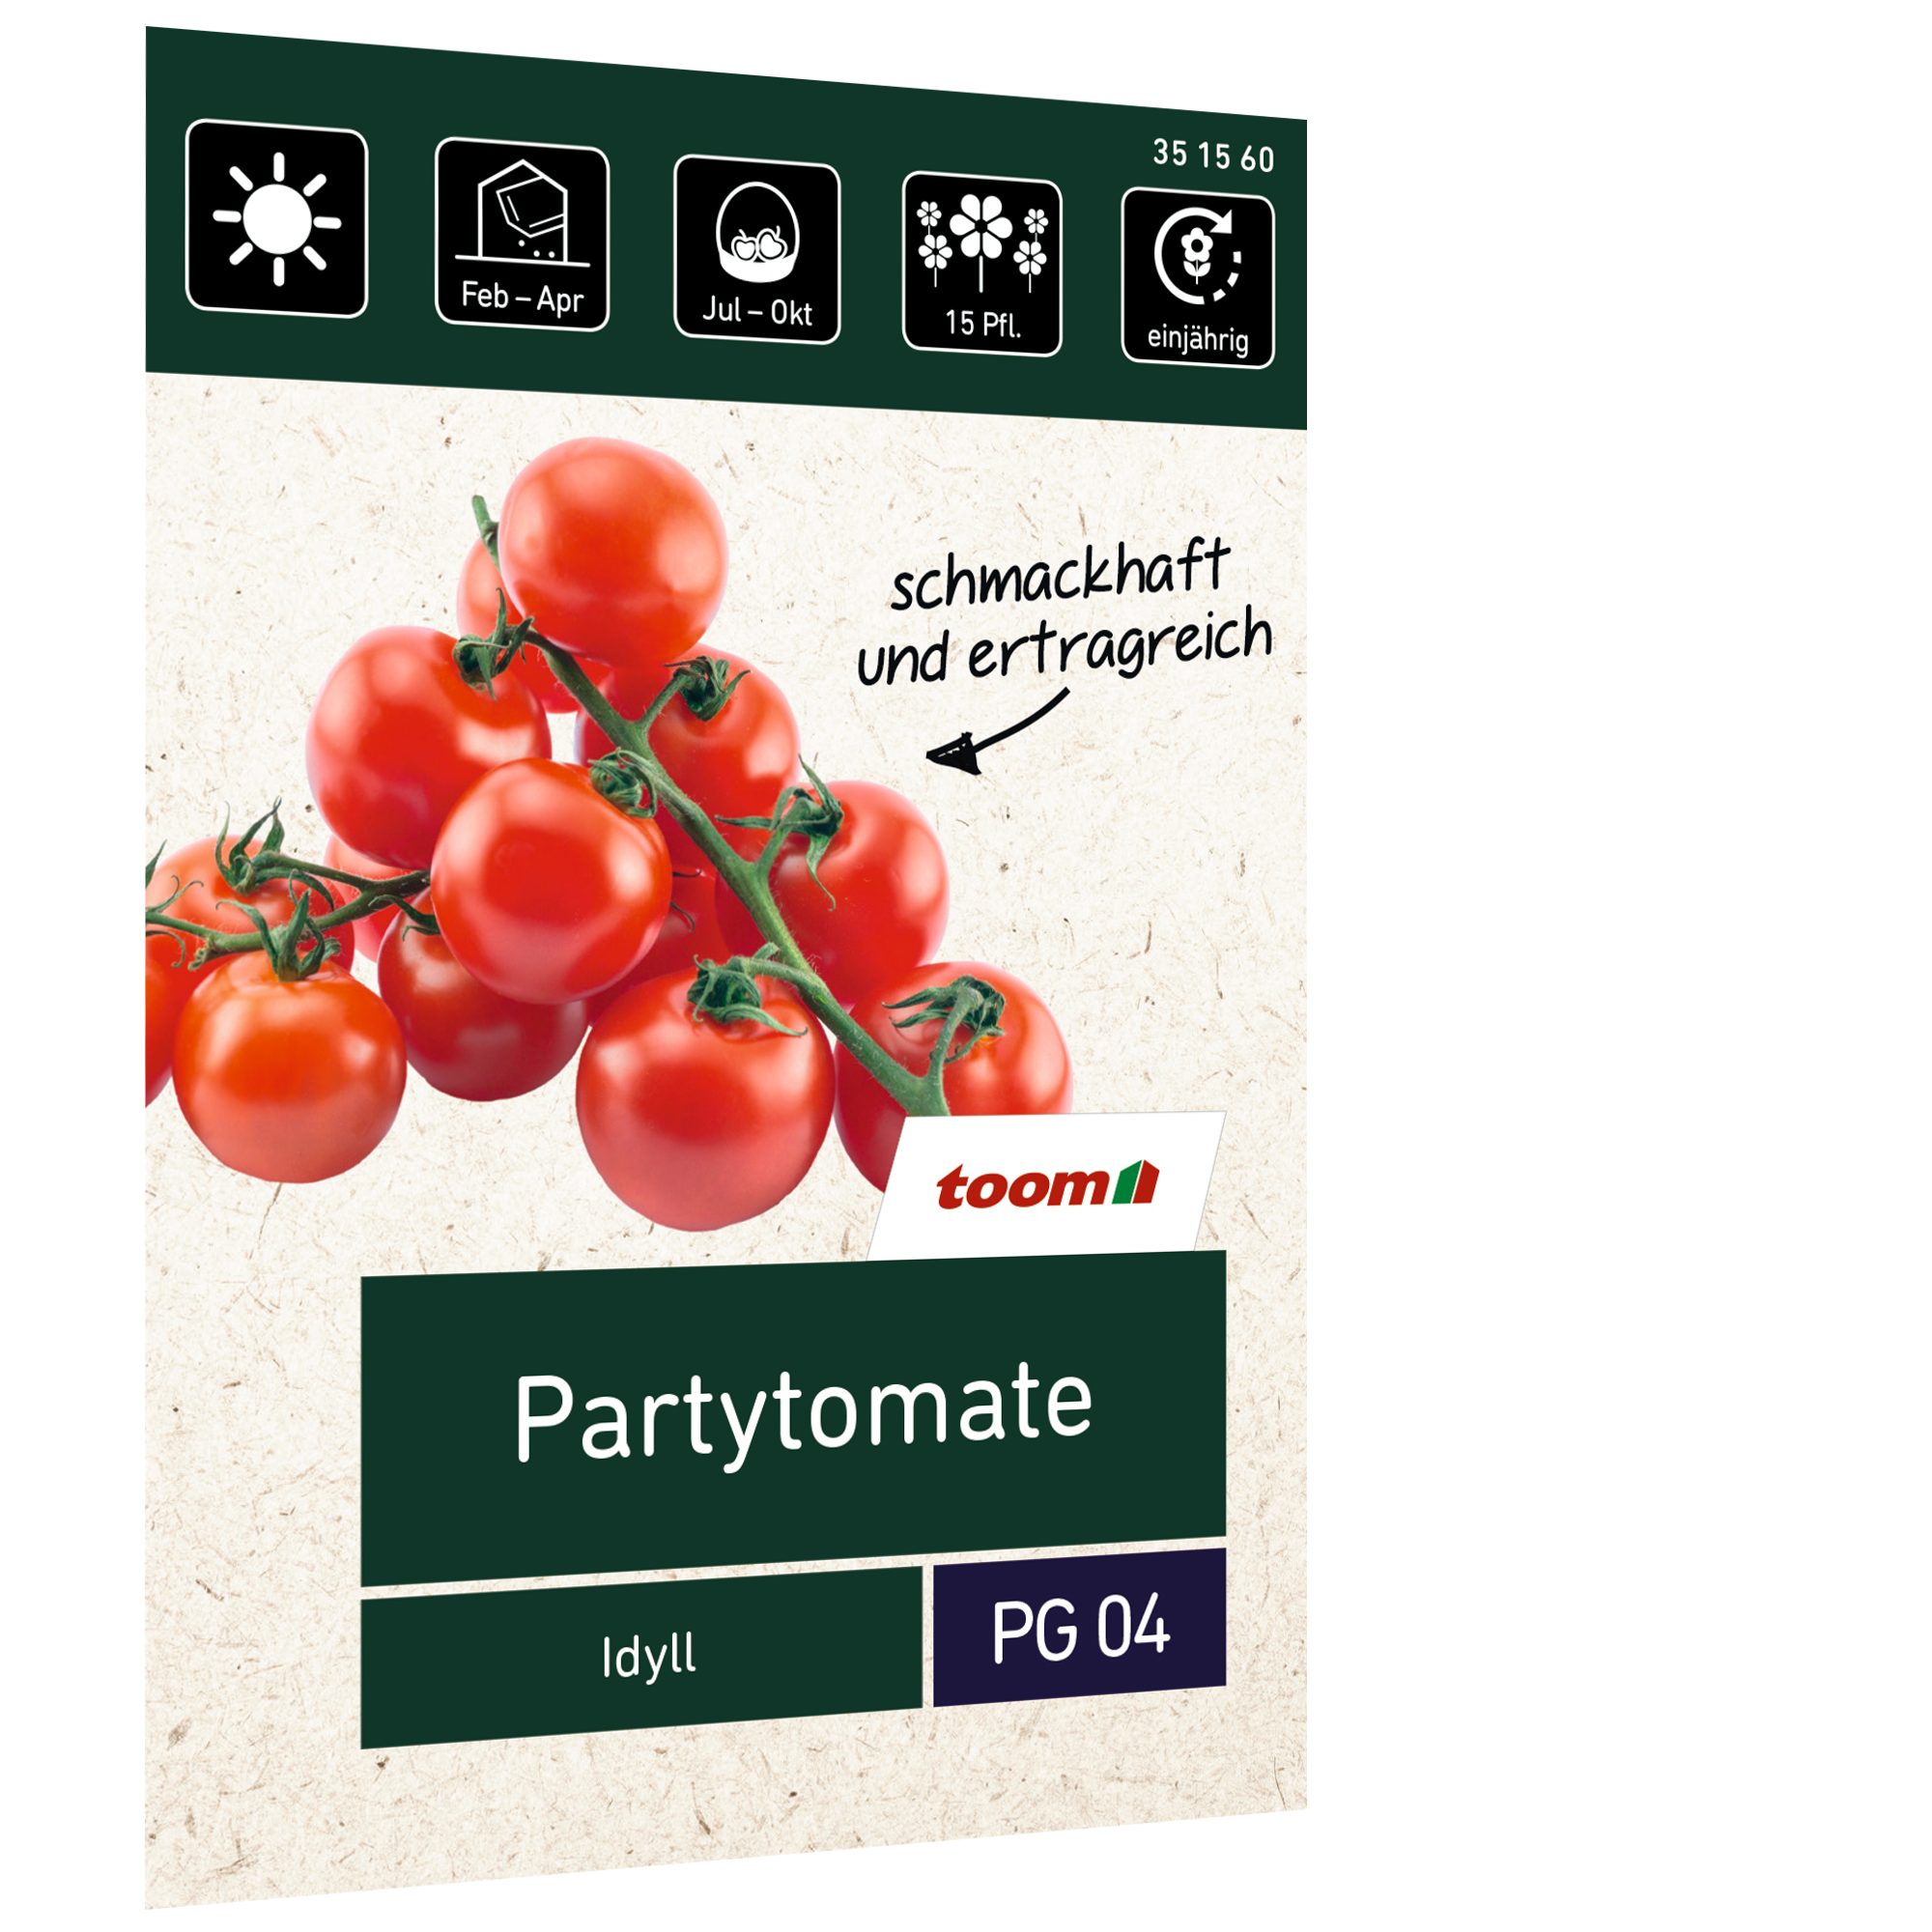 Partytomate 'Idyll' + product picture